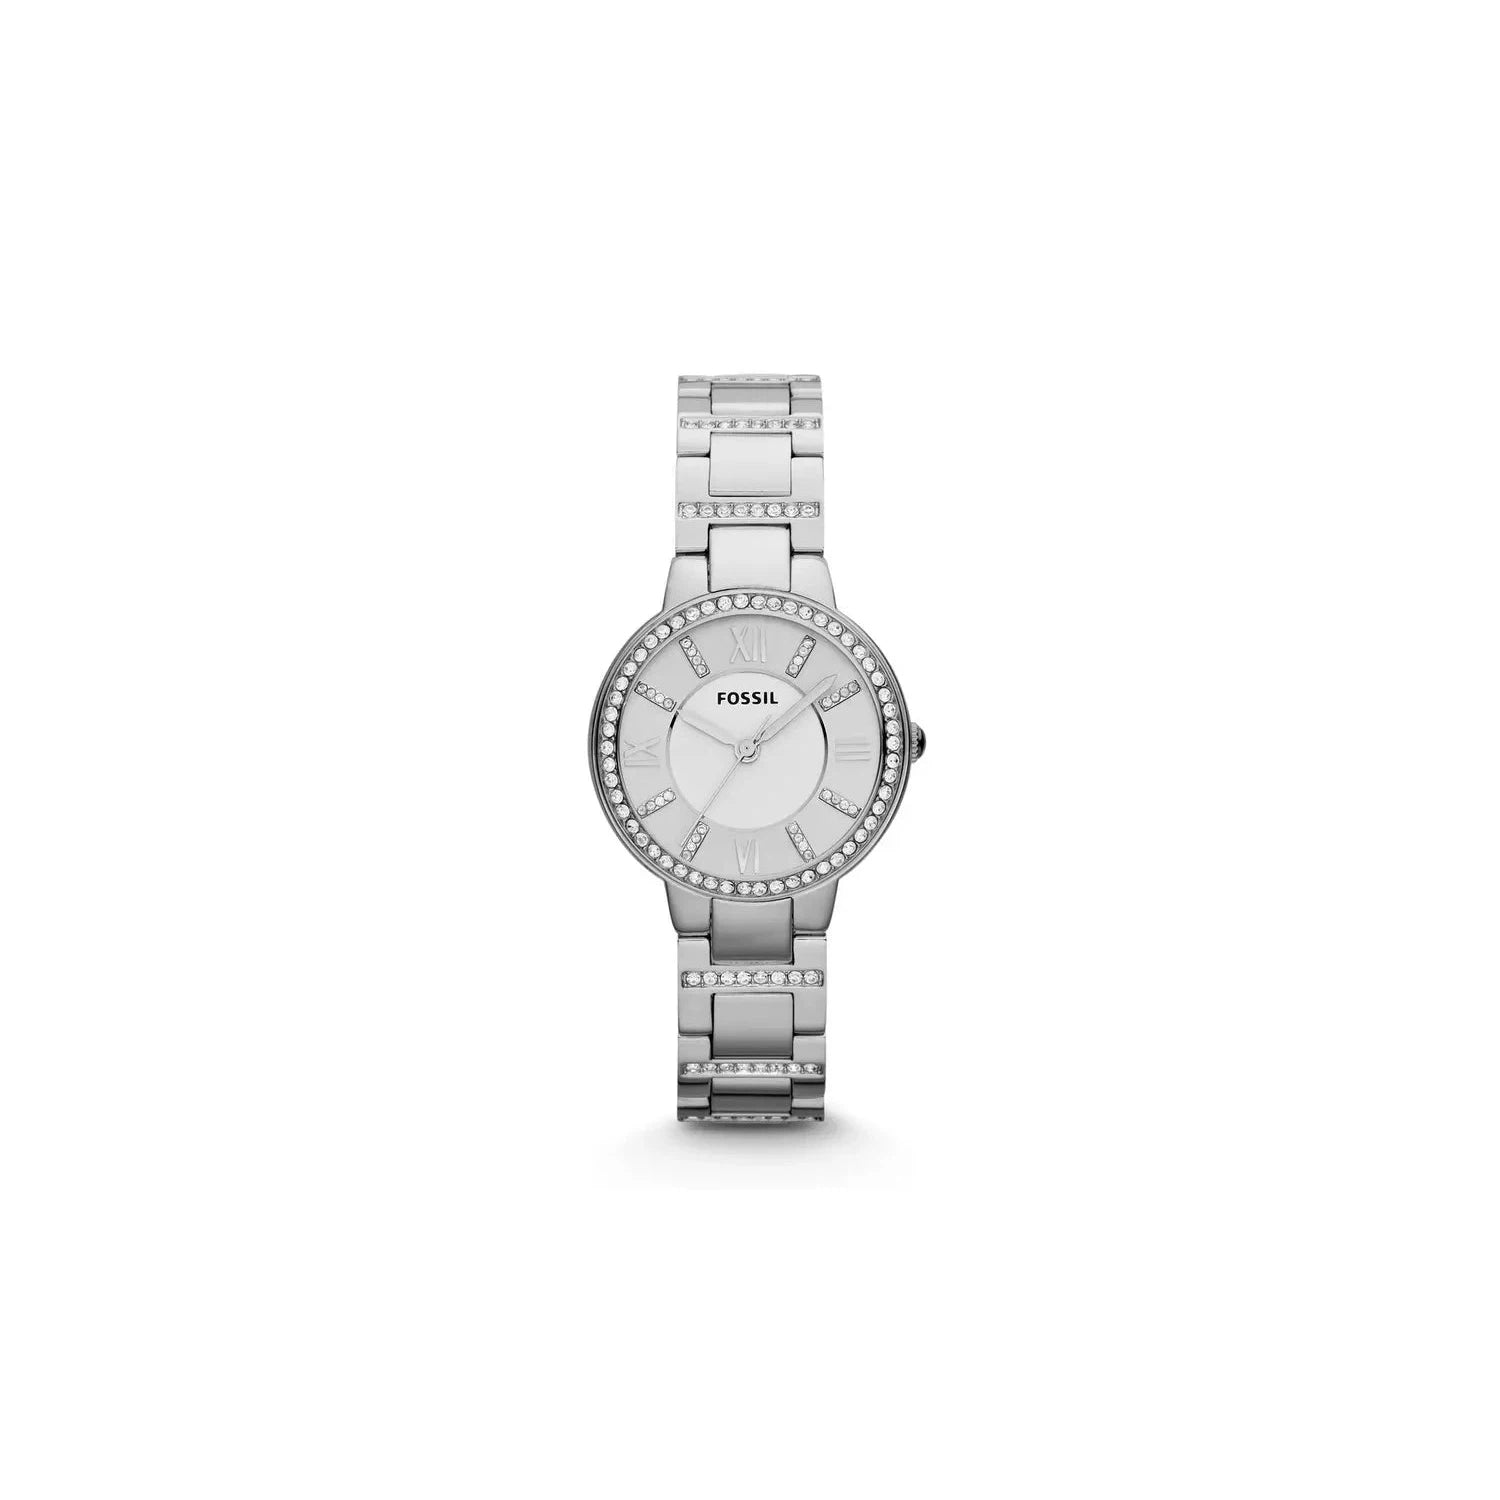 Fossil ES3282 Virginia Women's Stainless Steel Watch - Silver - Refurbished Excellent